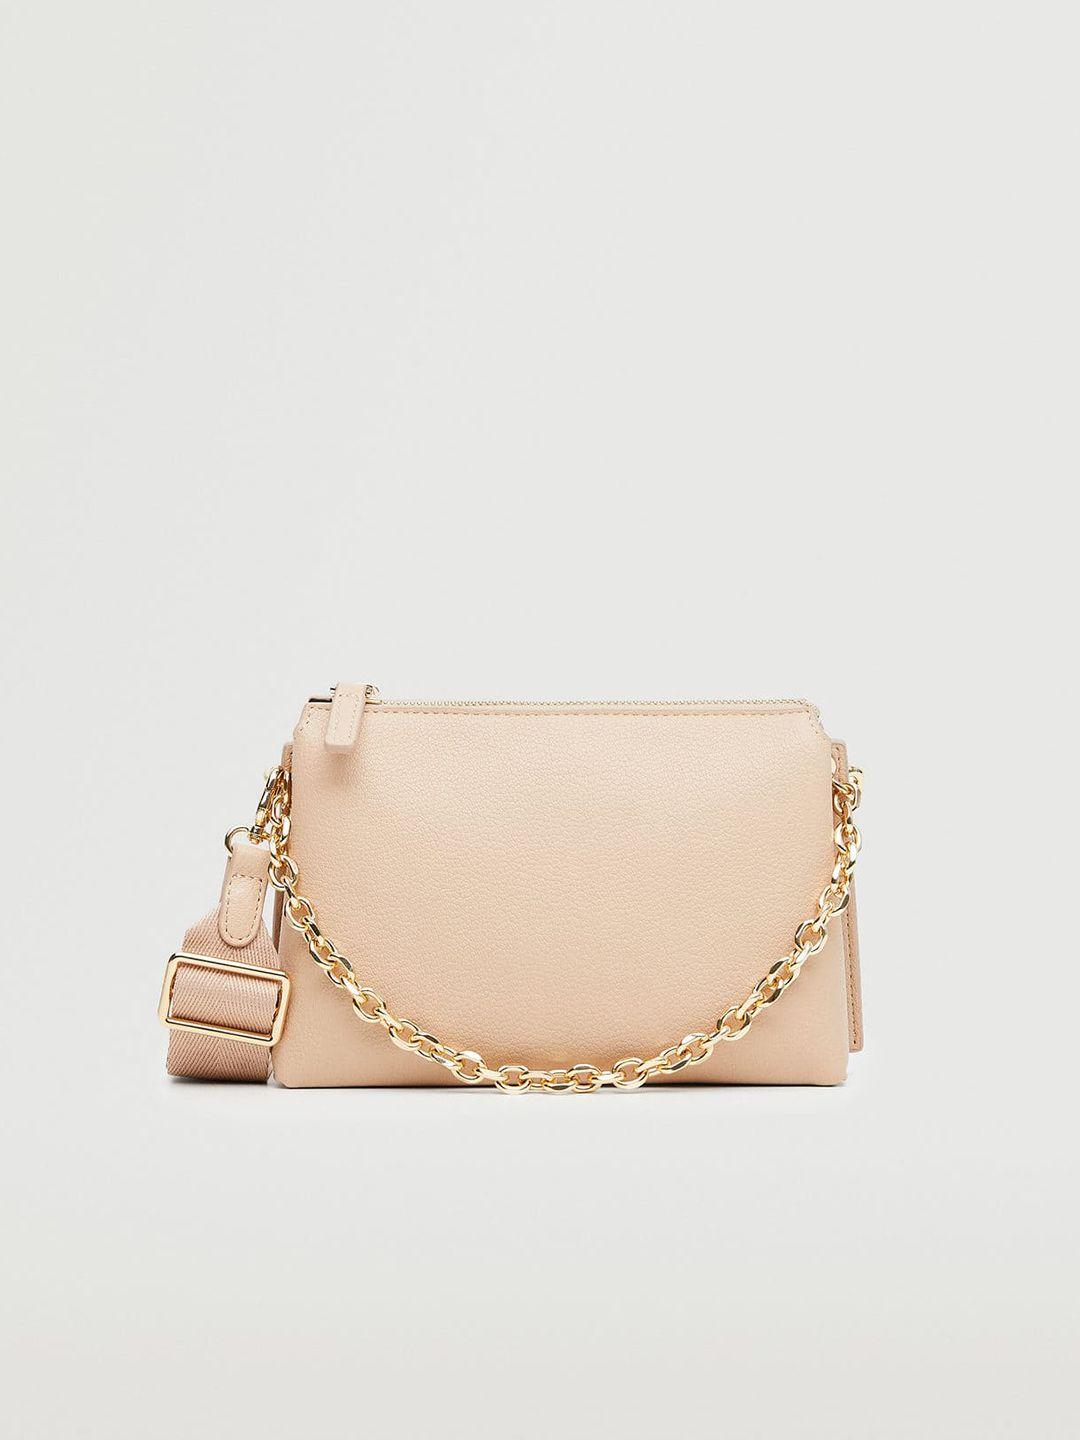 mango nude-coloured textured structured sling bag